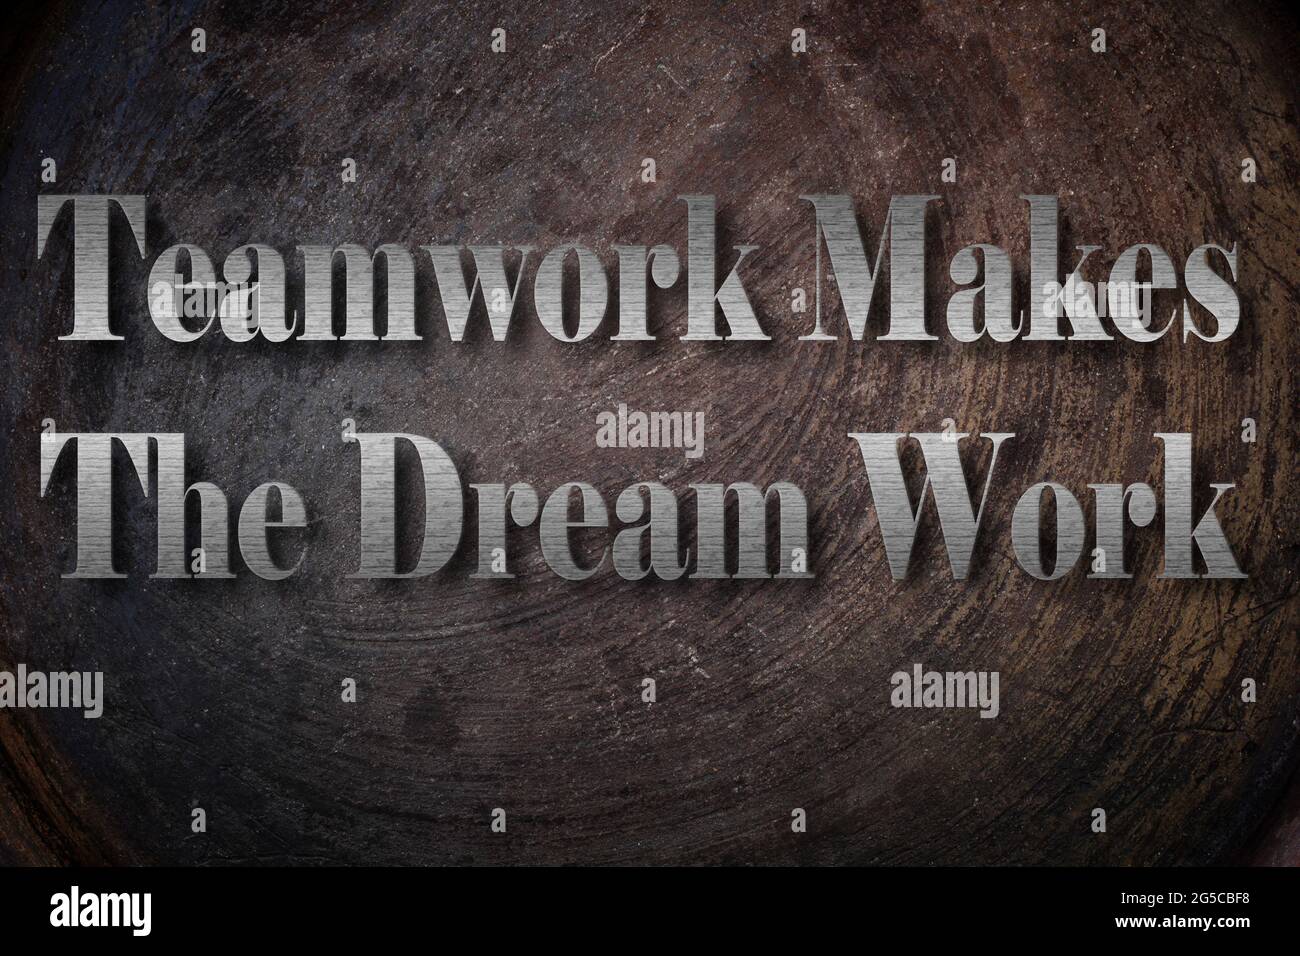 Teamwork Makes The Dream Work text on Background Stock Photo